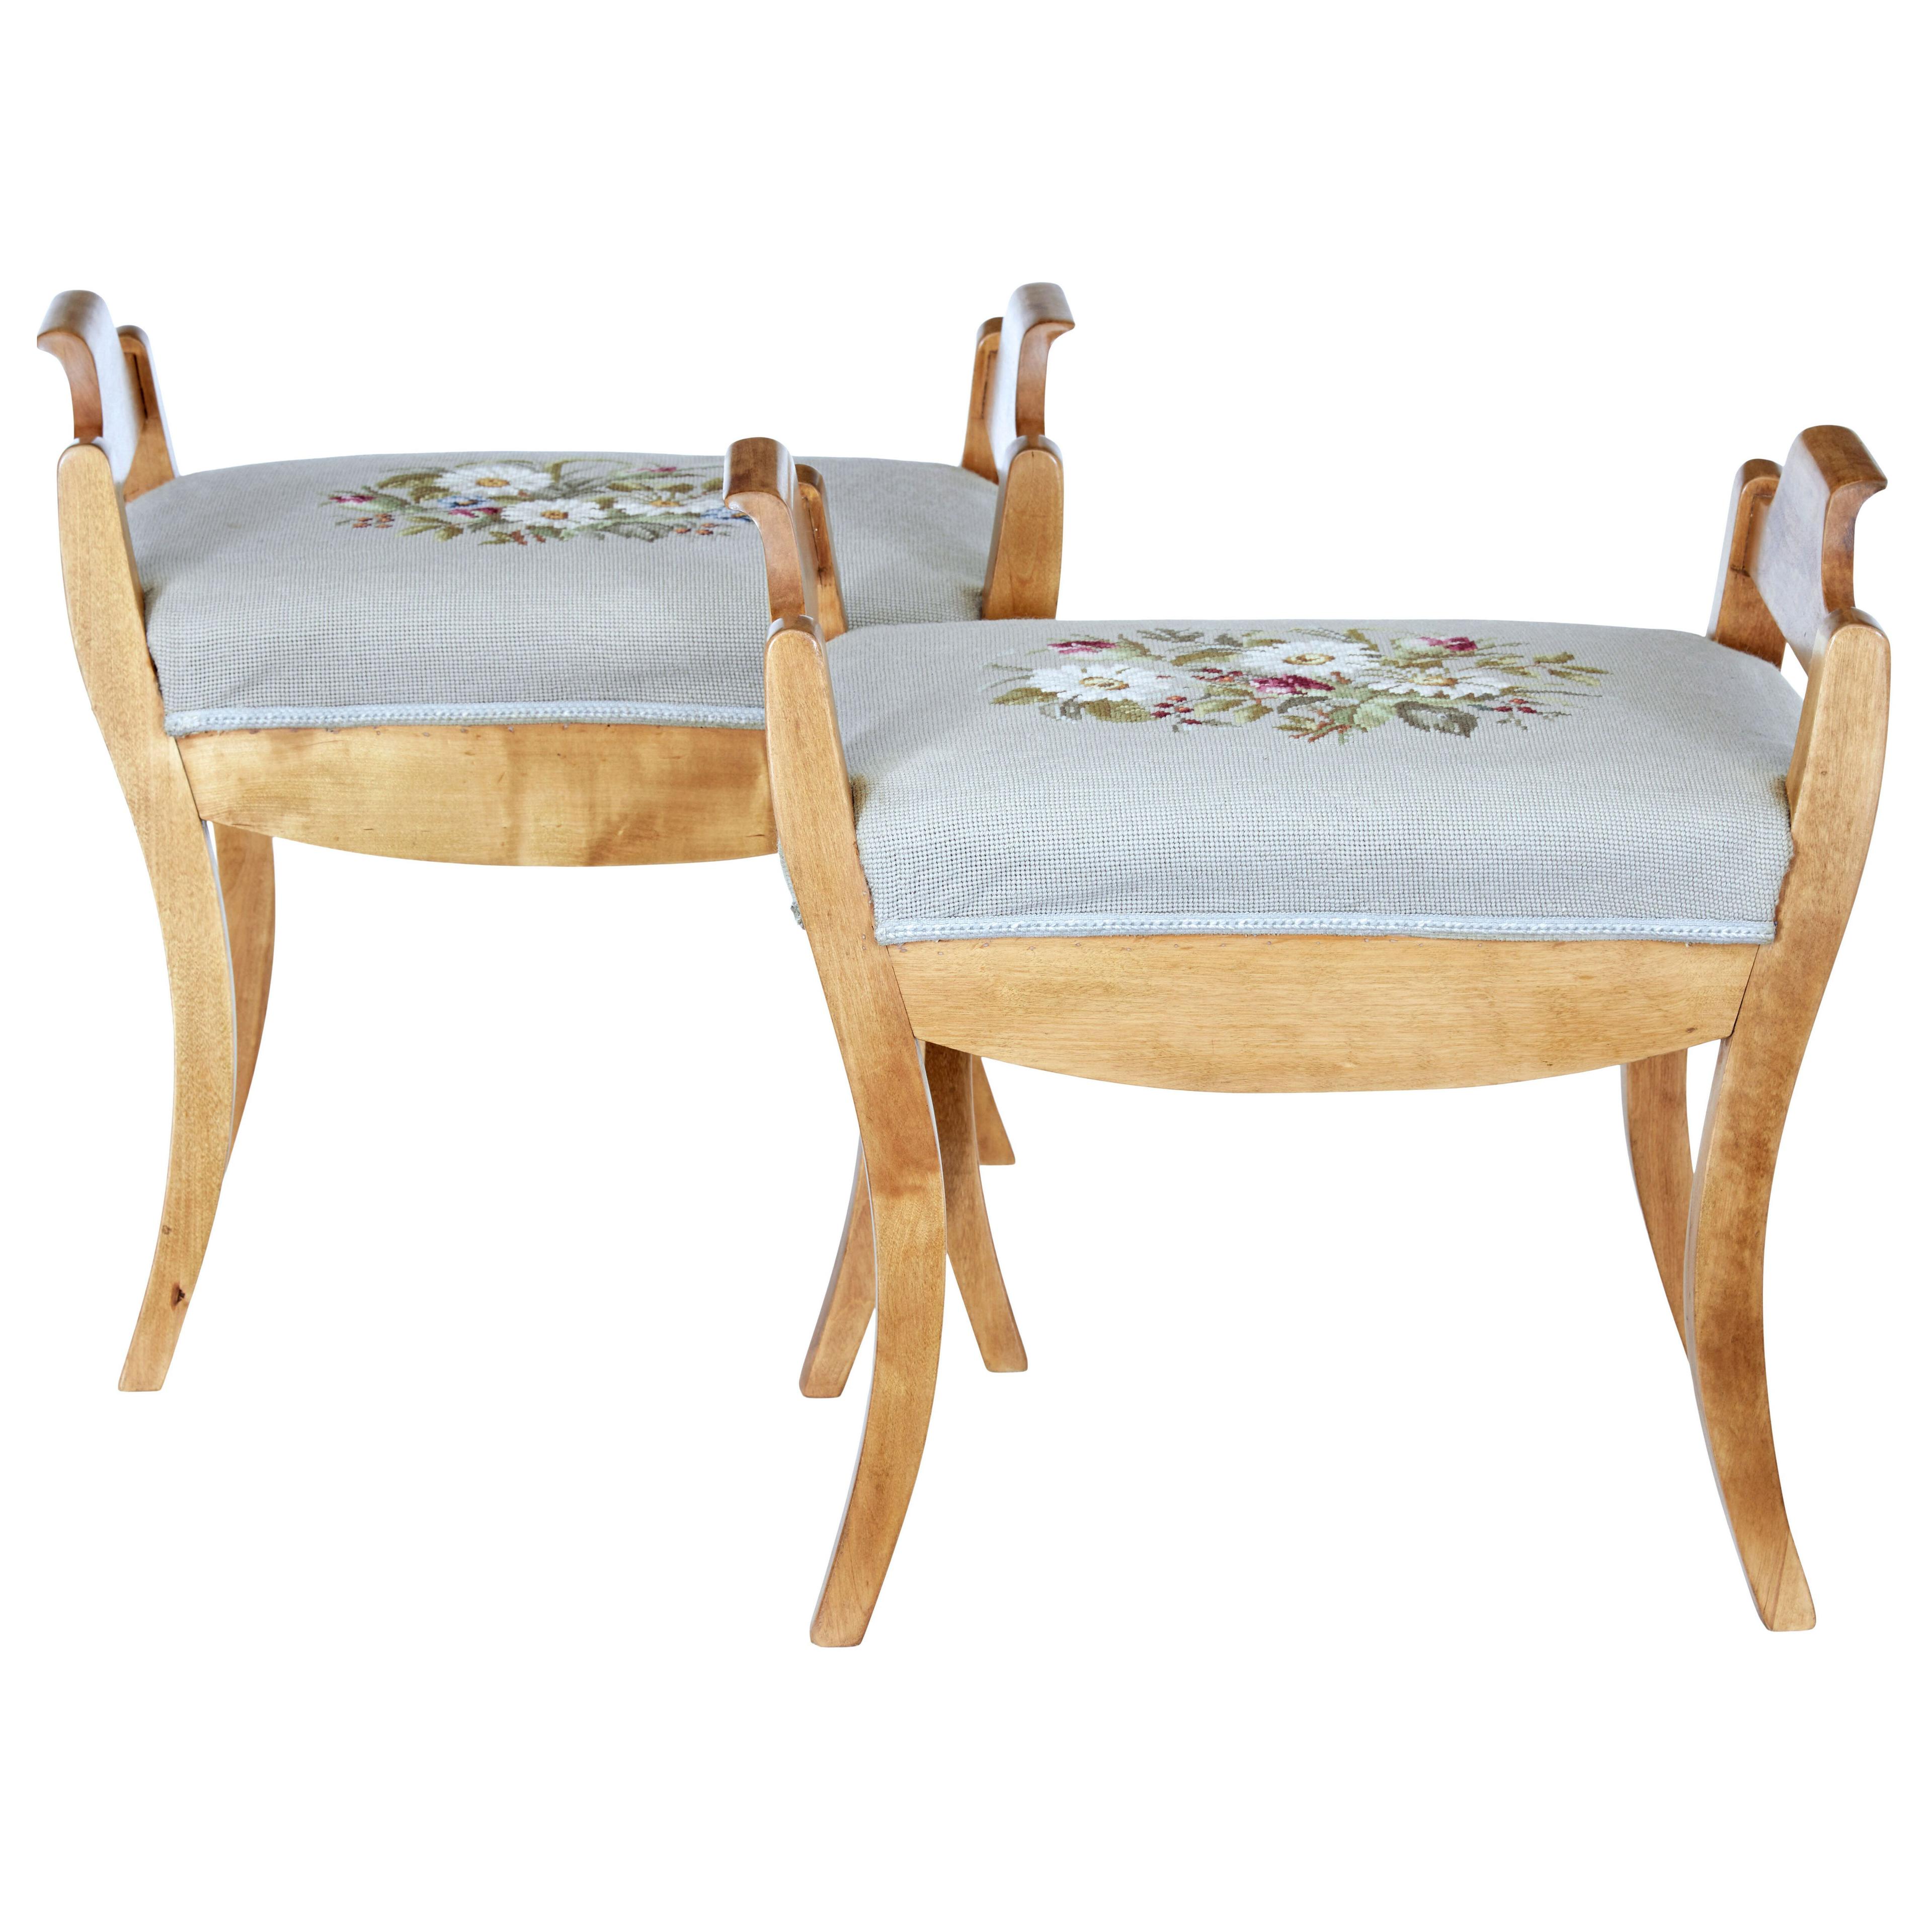 PAIR OF EARLY 20TH CENTURY BIRCH STOOLS